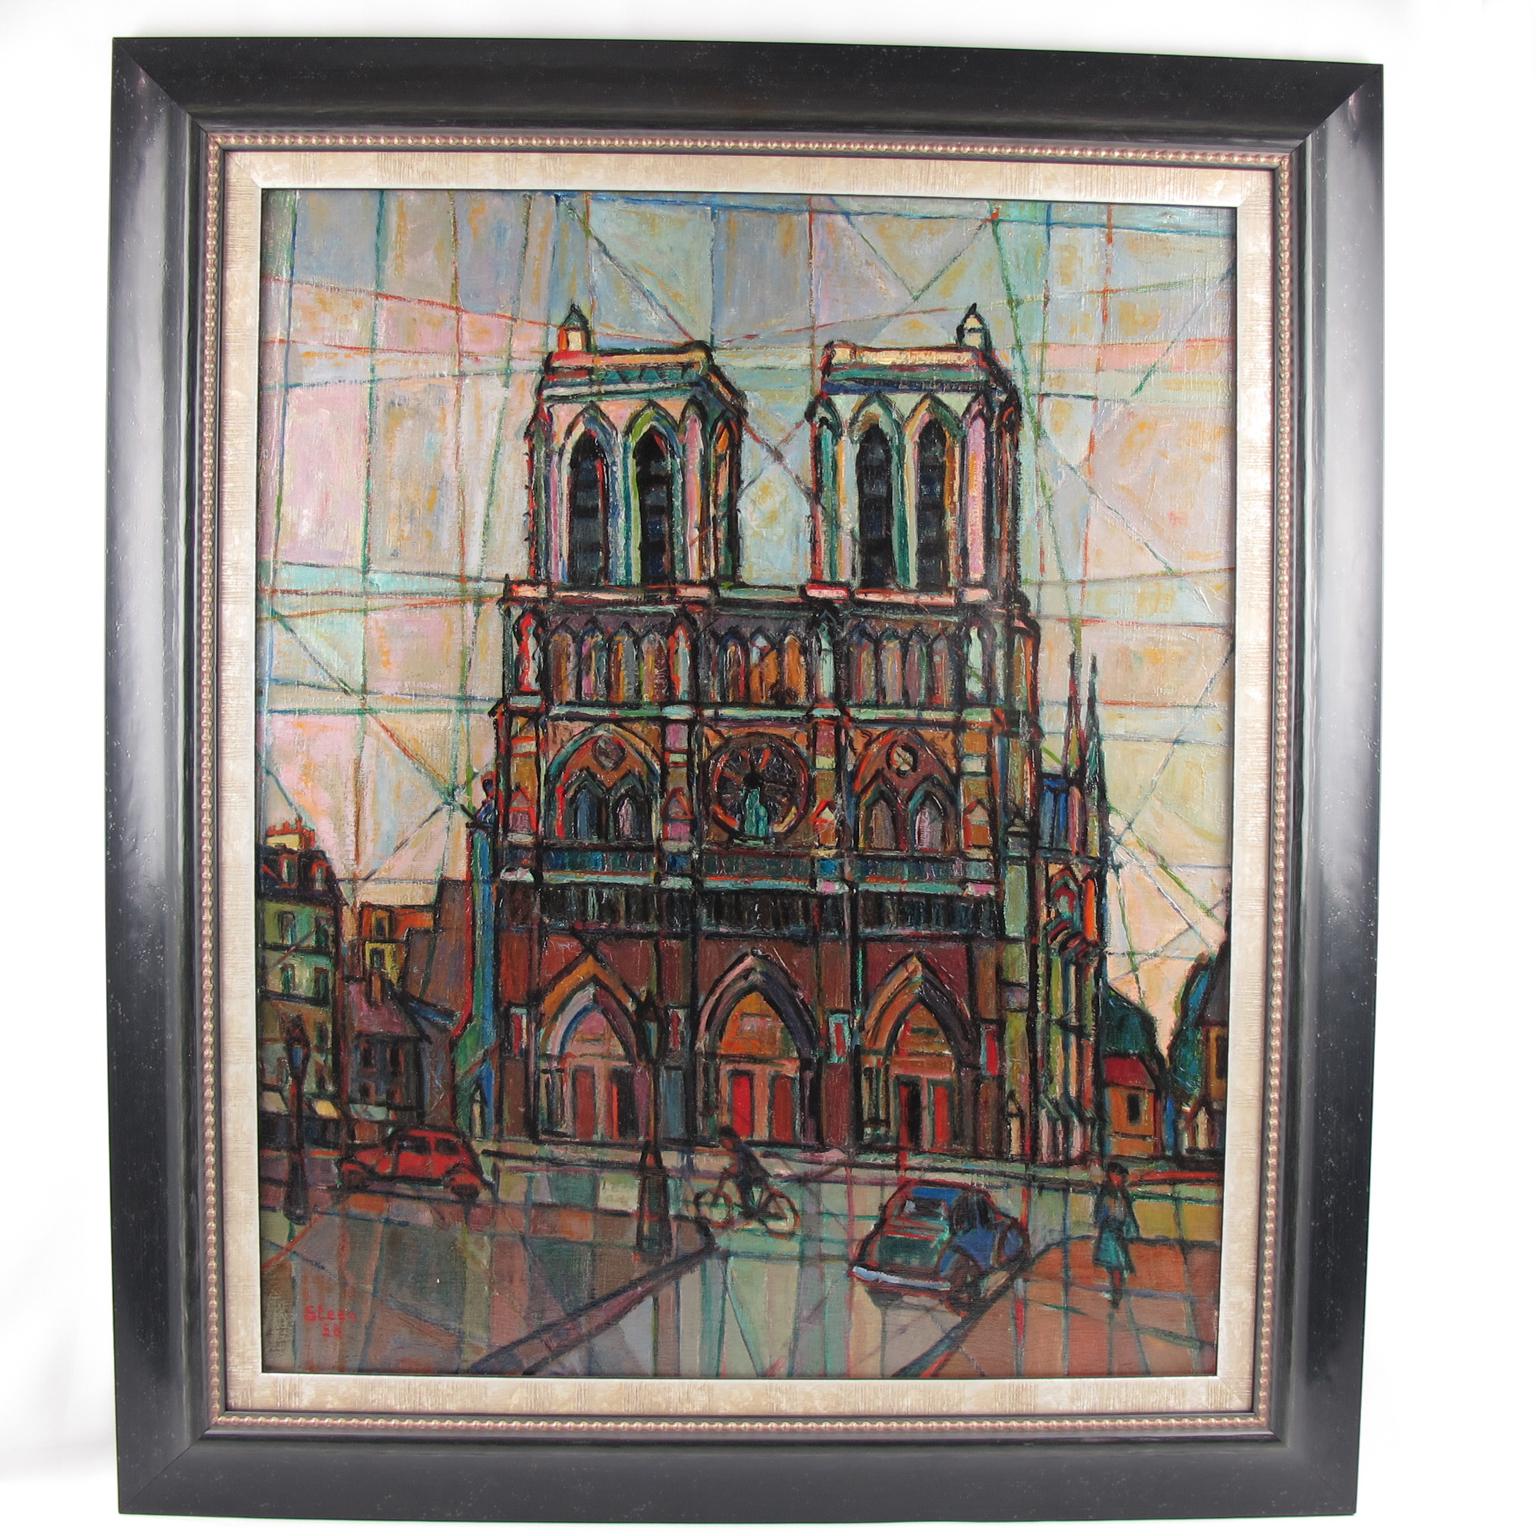 Very interesting oil on canvas painting by Cecil Steen, France (20th century). Cubist technic, signed bottom left corner.
Stunning composition featuring Notre Dame Cathedral in Paris. Extremely vivid colors with lots of contrast and geometric